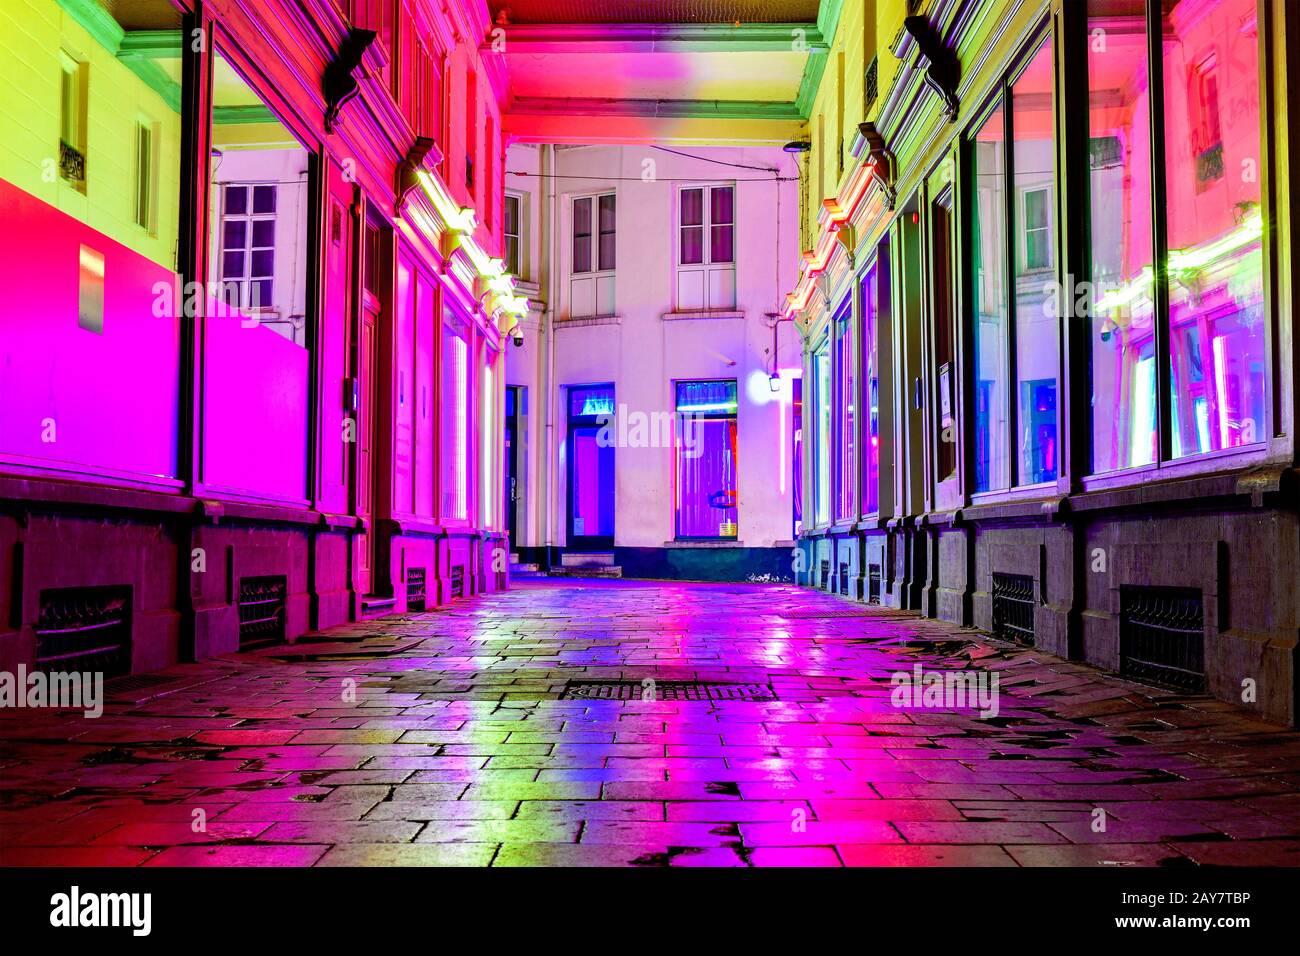 Quartiere A Luci Rosse 'Glass Alley' A Gand (Belgio) Foto Stock